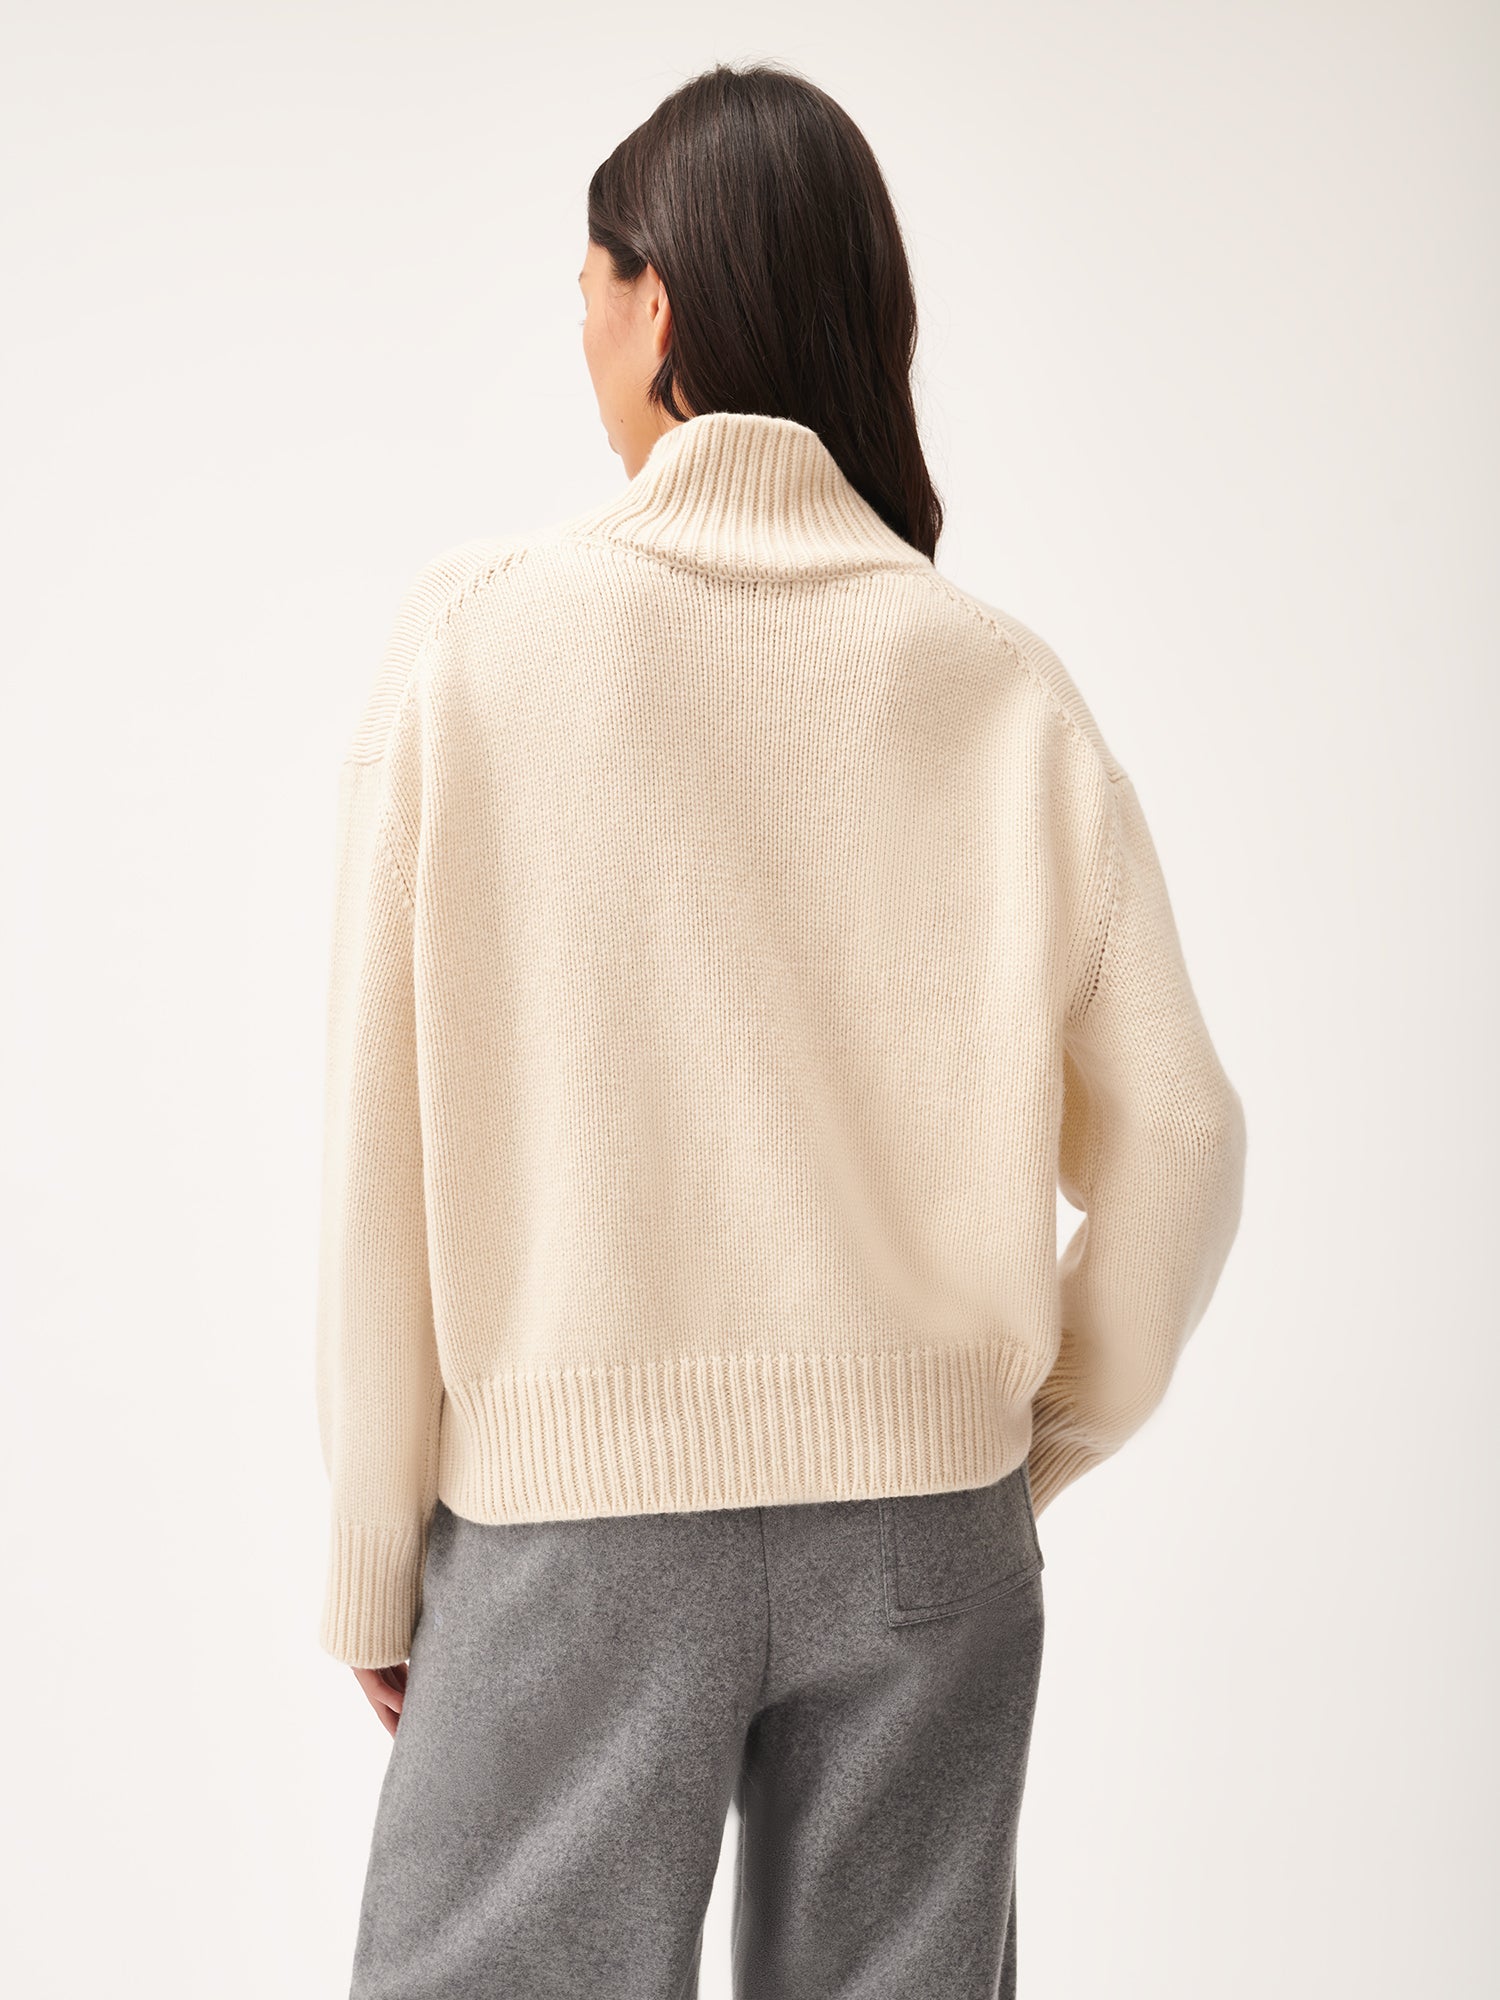 Womens_Recycled_Cashmere_Knit_Chunky_Turtleneck_Sweater_Ecru_Ivory-2